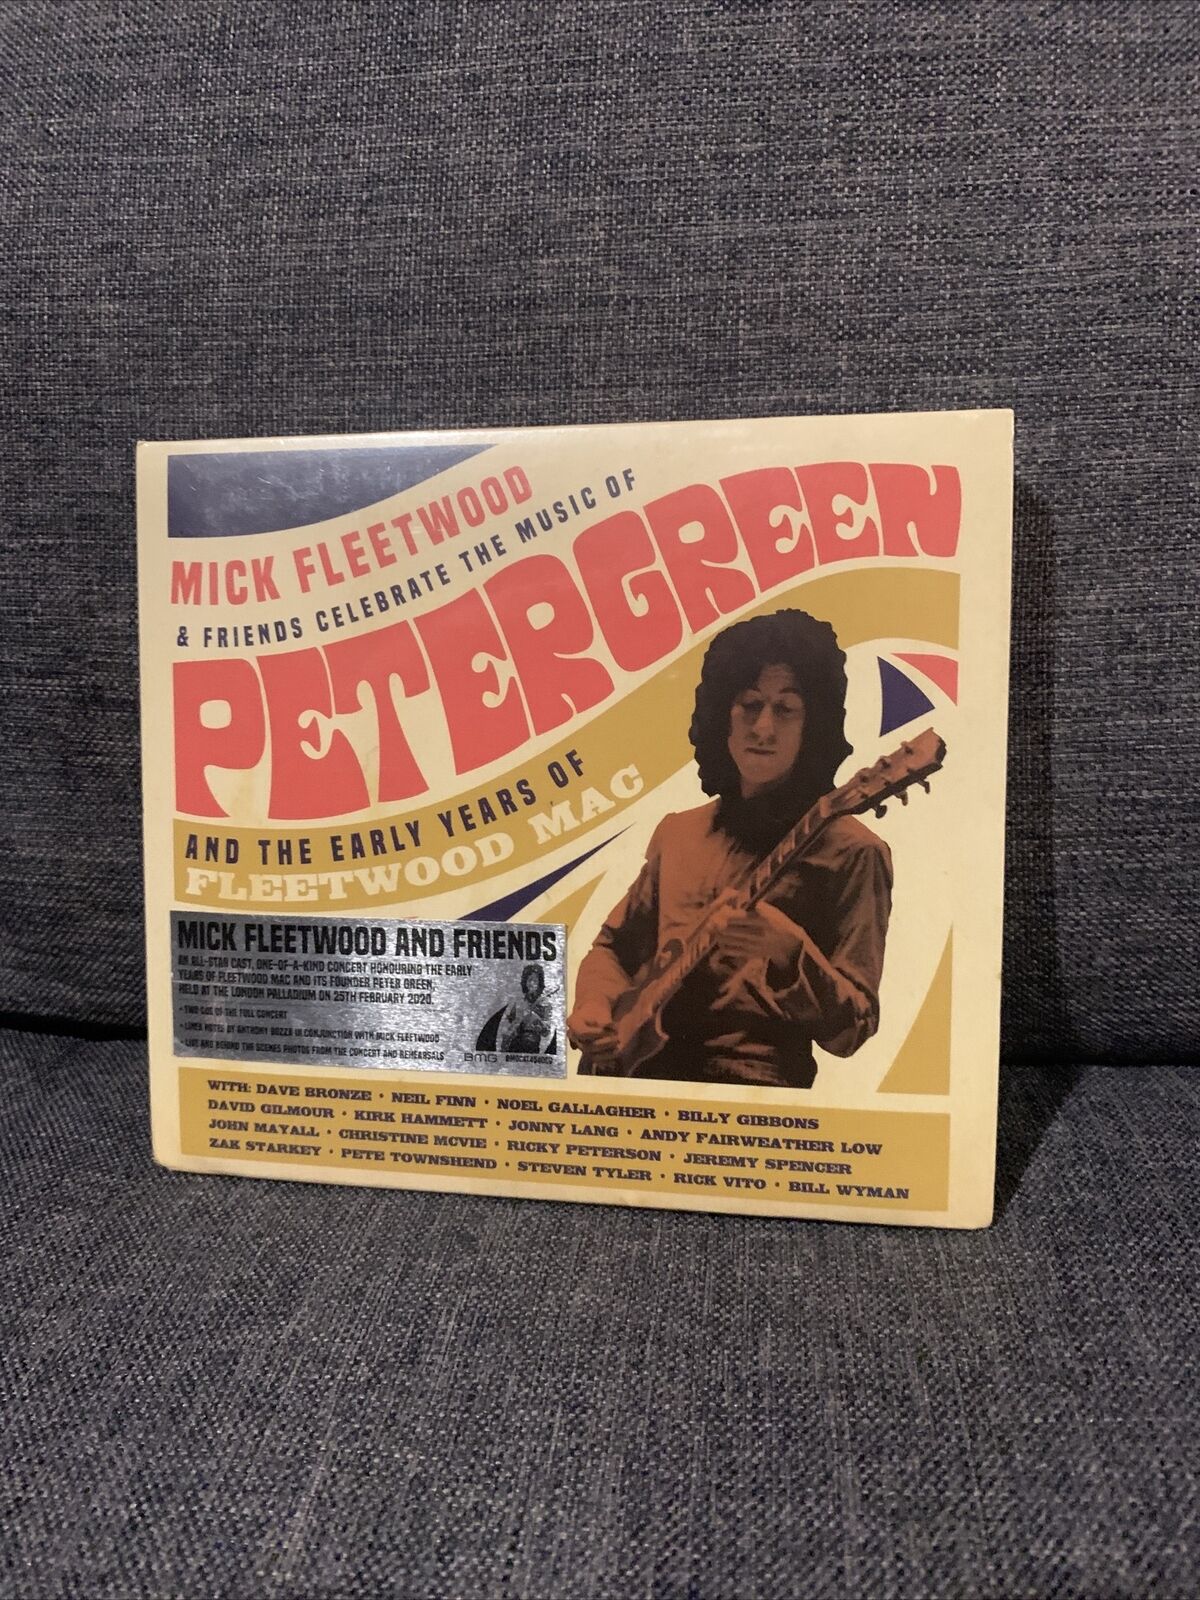 MICK FLEETWOOD & FRIENDS CELEBRATE THE MUSIC OF PETER GREEN AND THE EARLY YEARS 